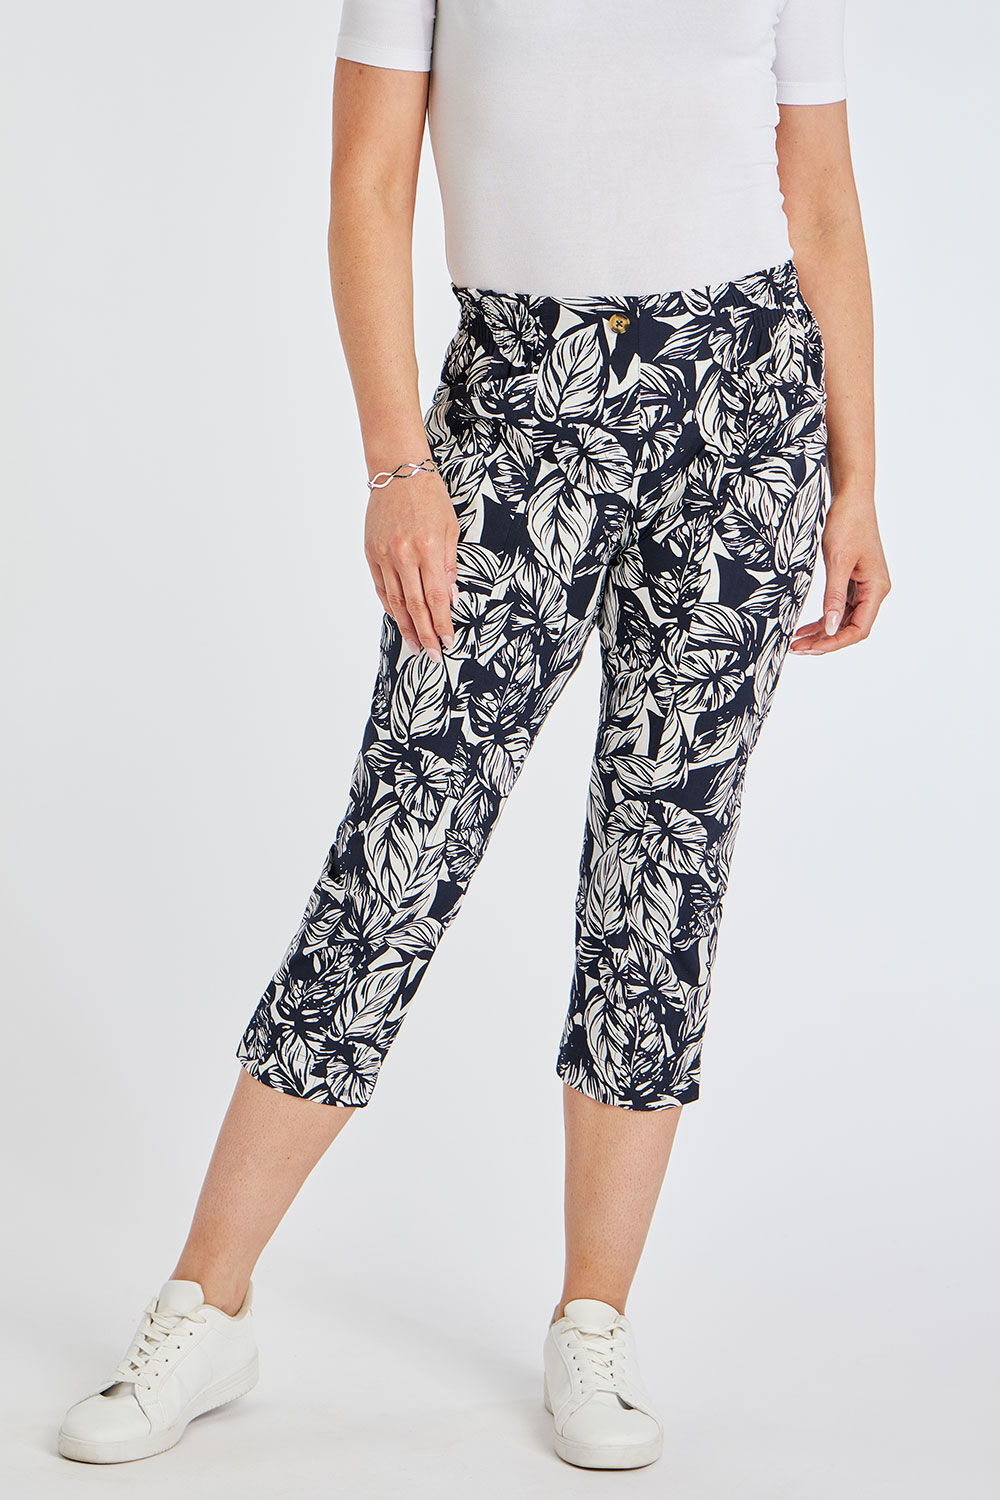 Bonmarche Navy Leaf Print Elasticated Back Essential Cropped Trousers, Size: 14